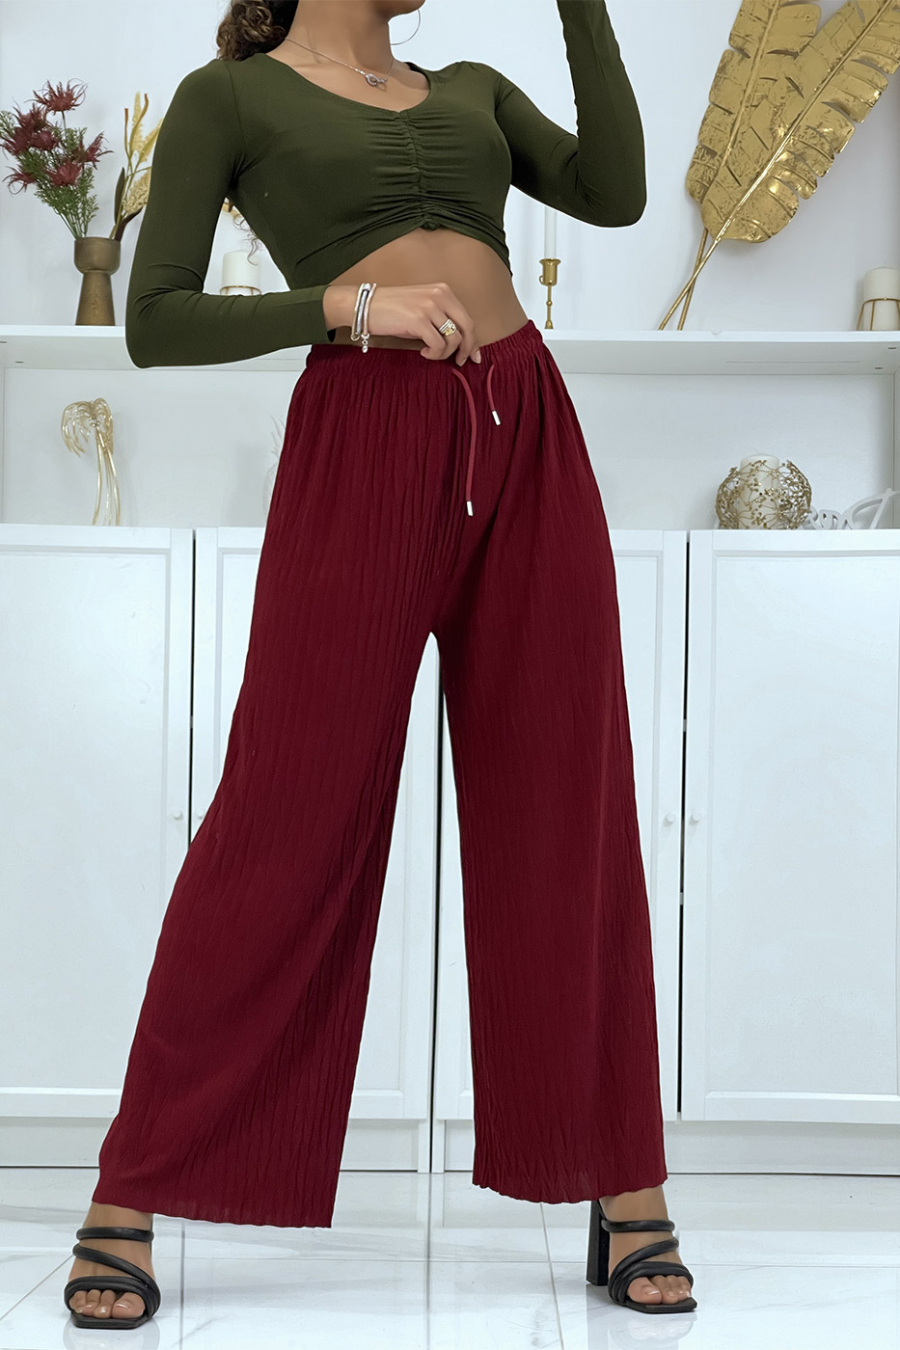 Pleated palazzo pants suit: a 70s inspiration | Fashion and Cookies -  fashion and beauty blog